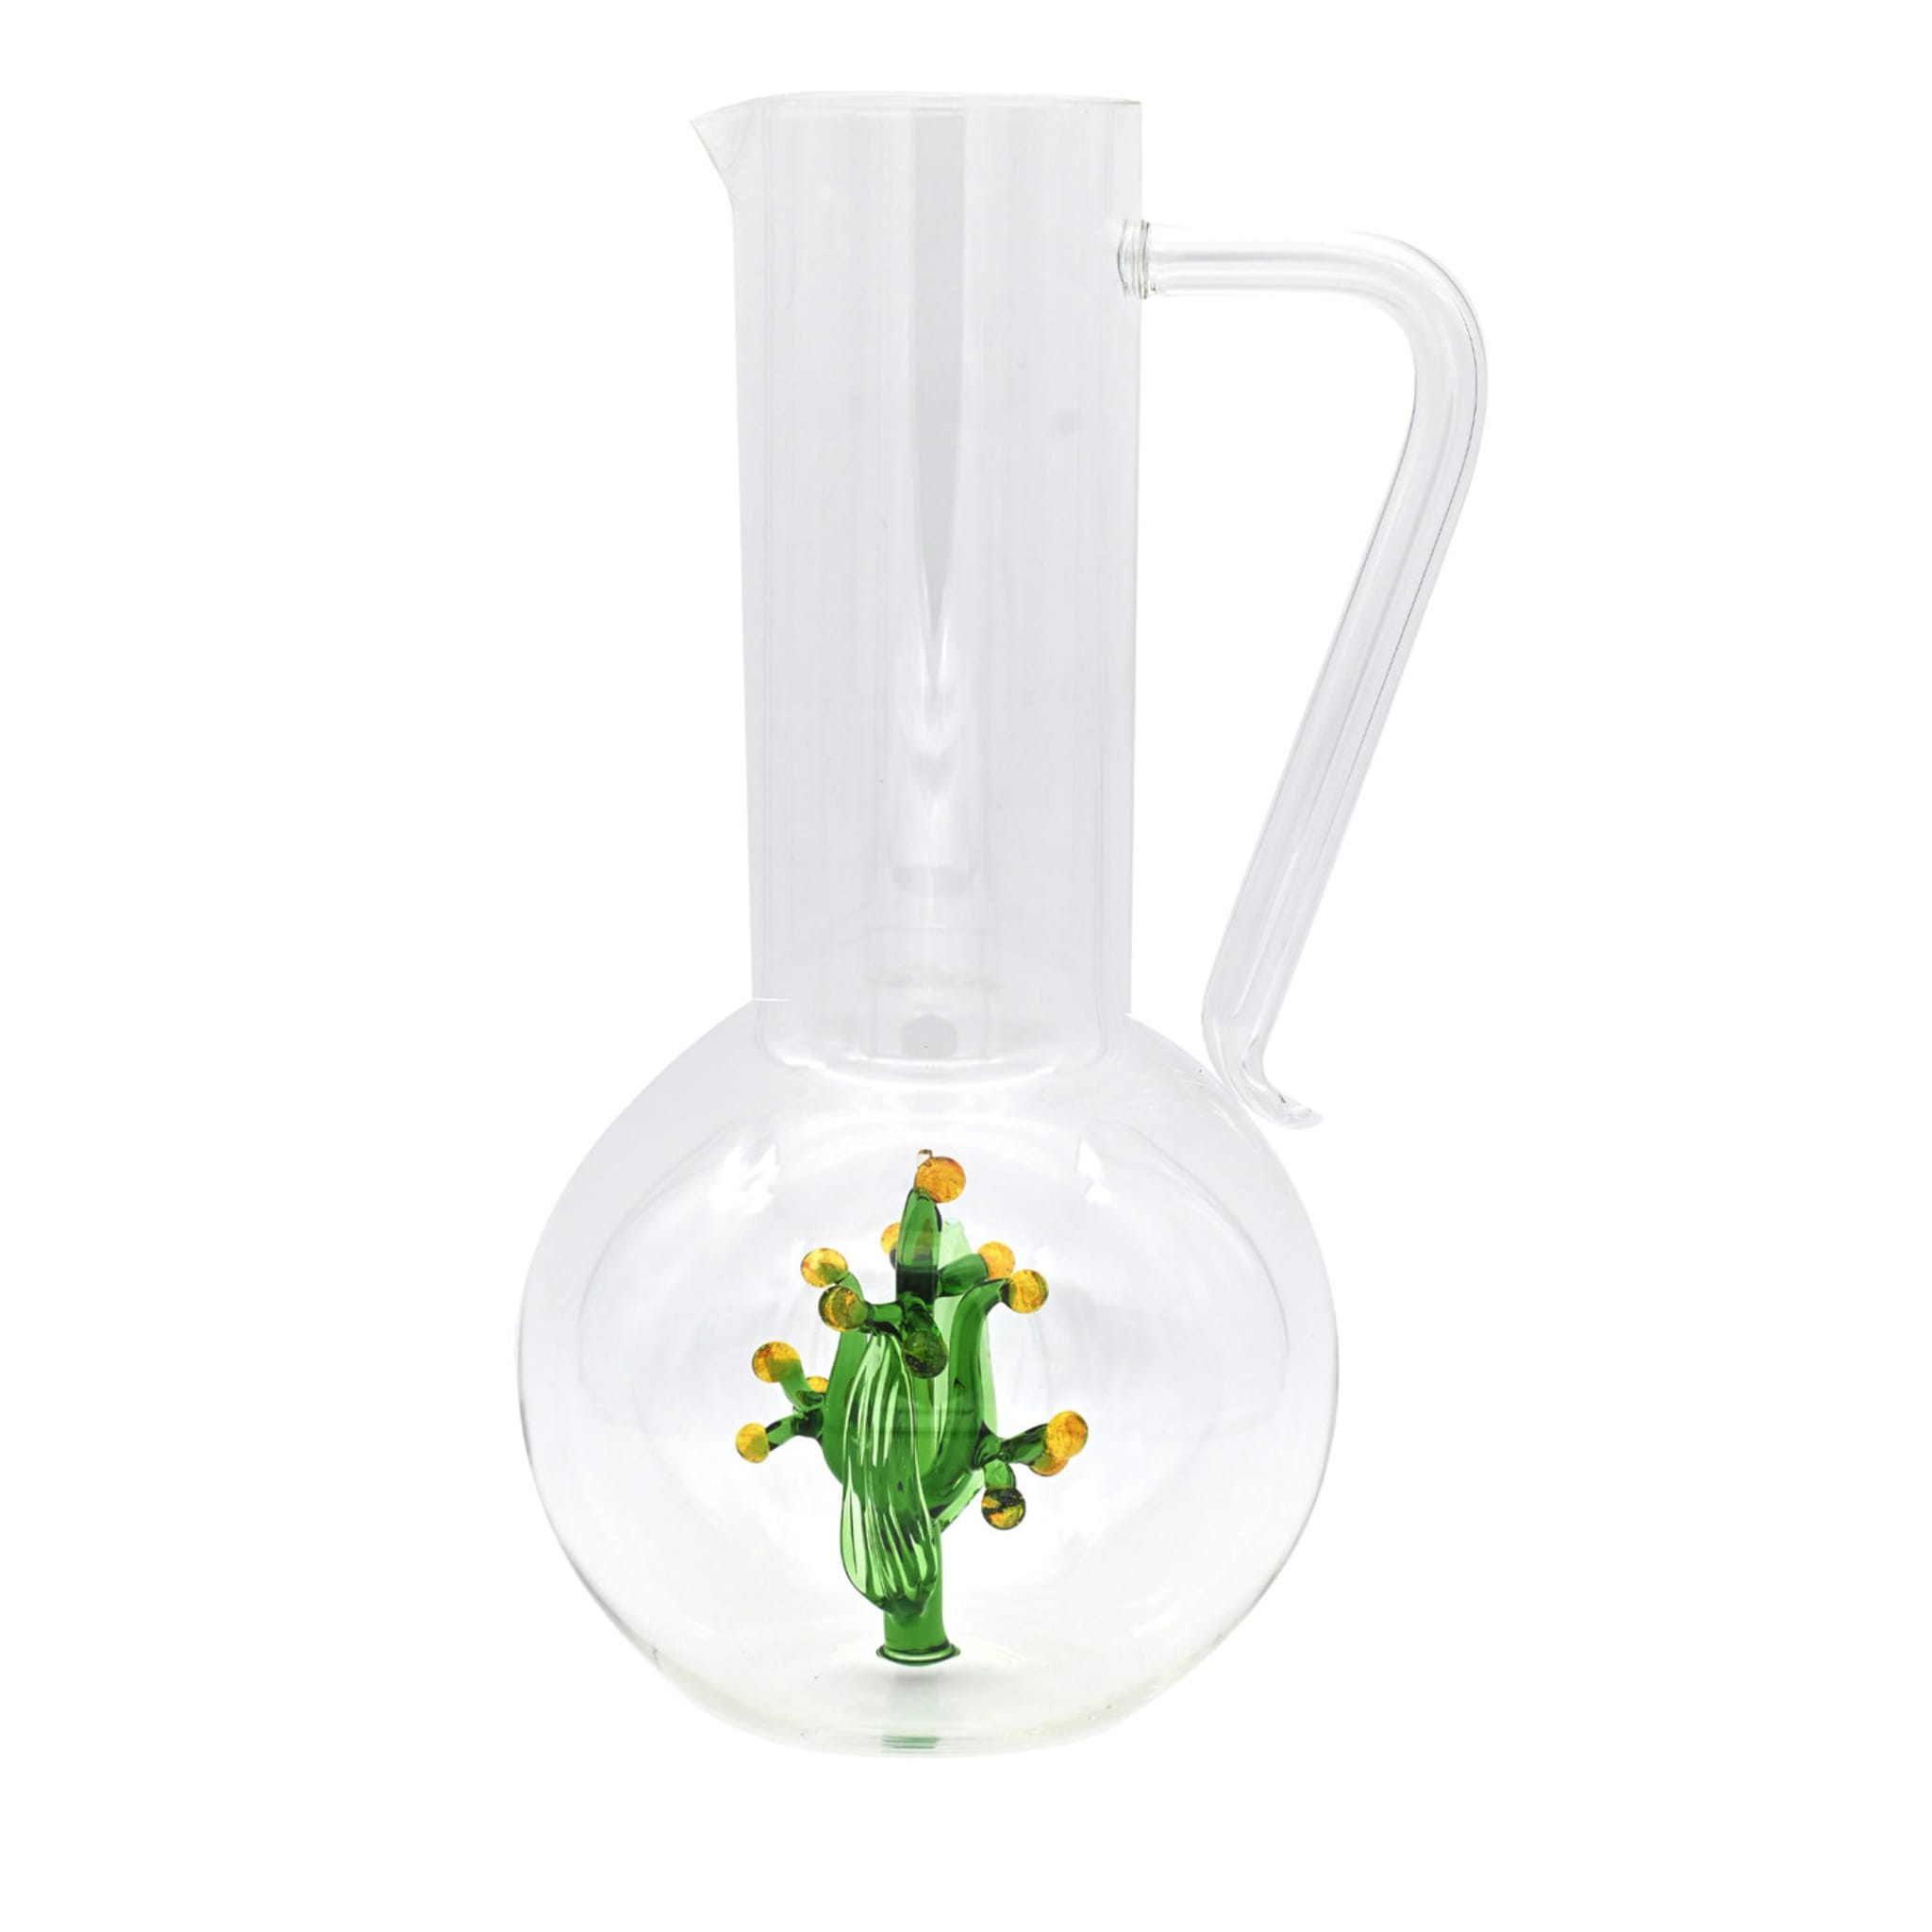 Flower Power Set of 6 Glasses and Jug - Alternative view 1